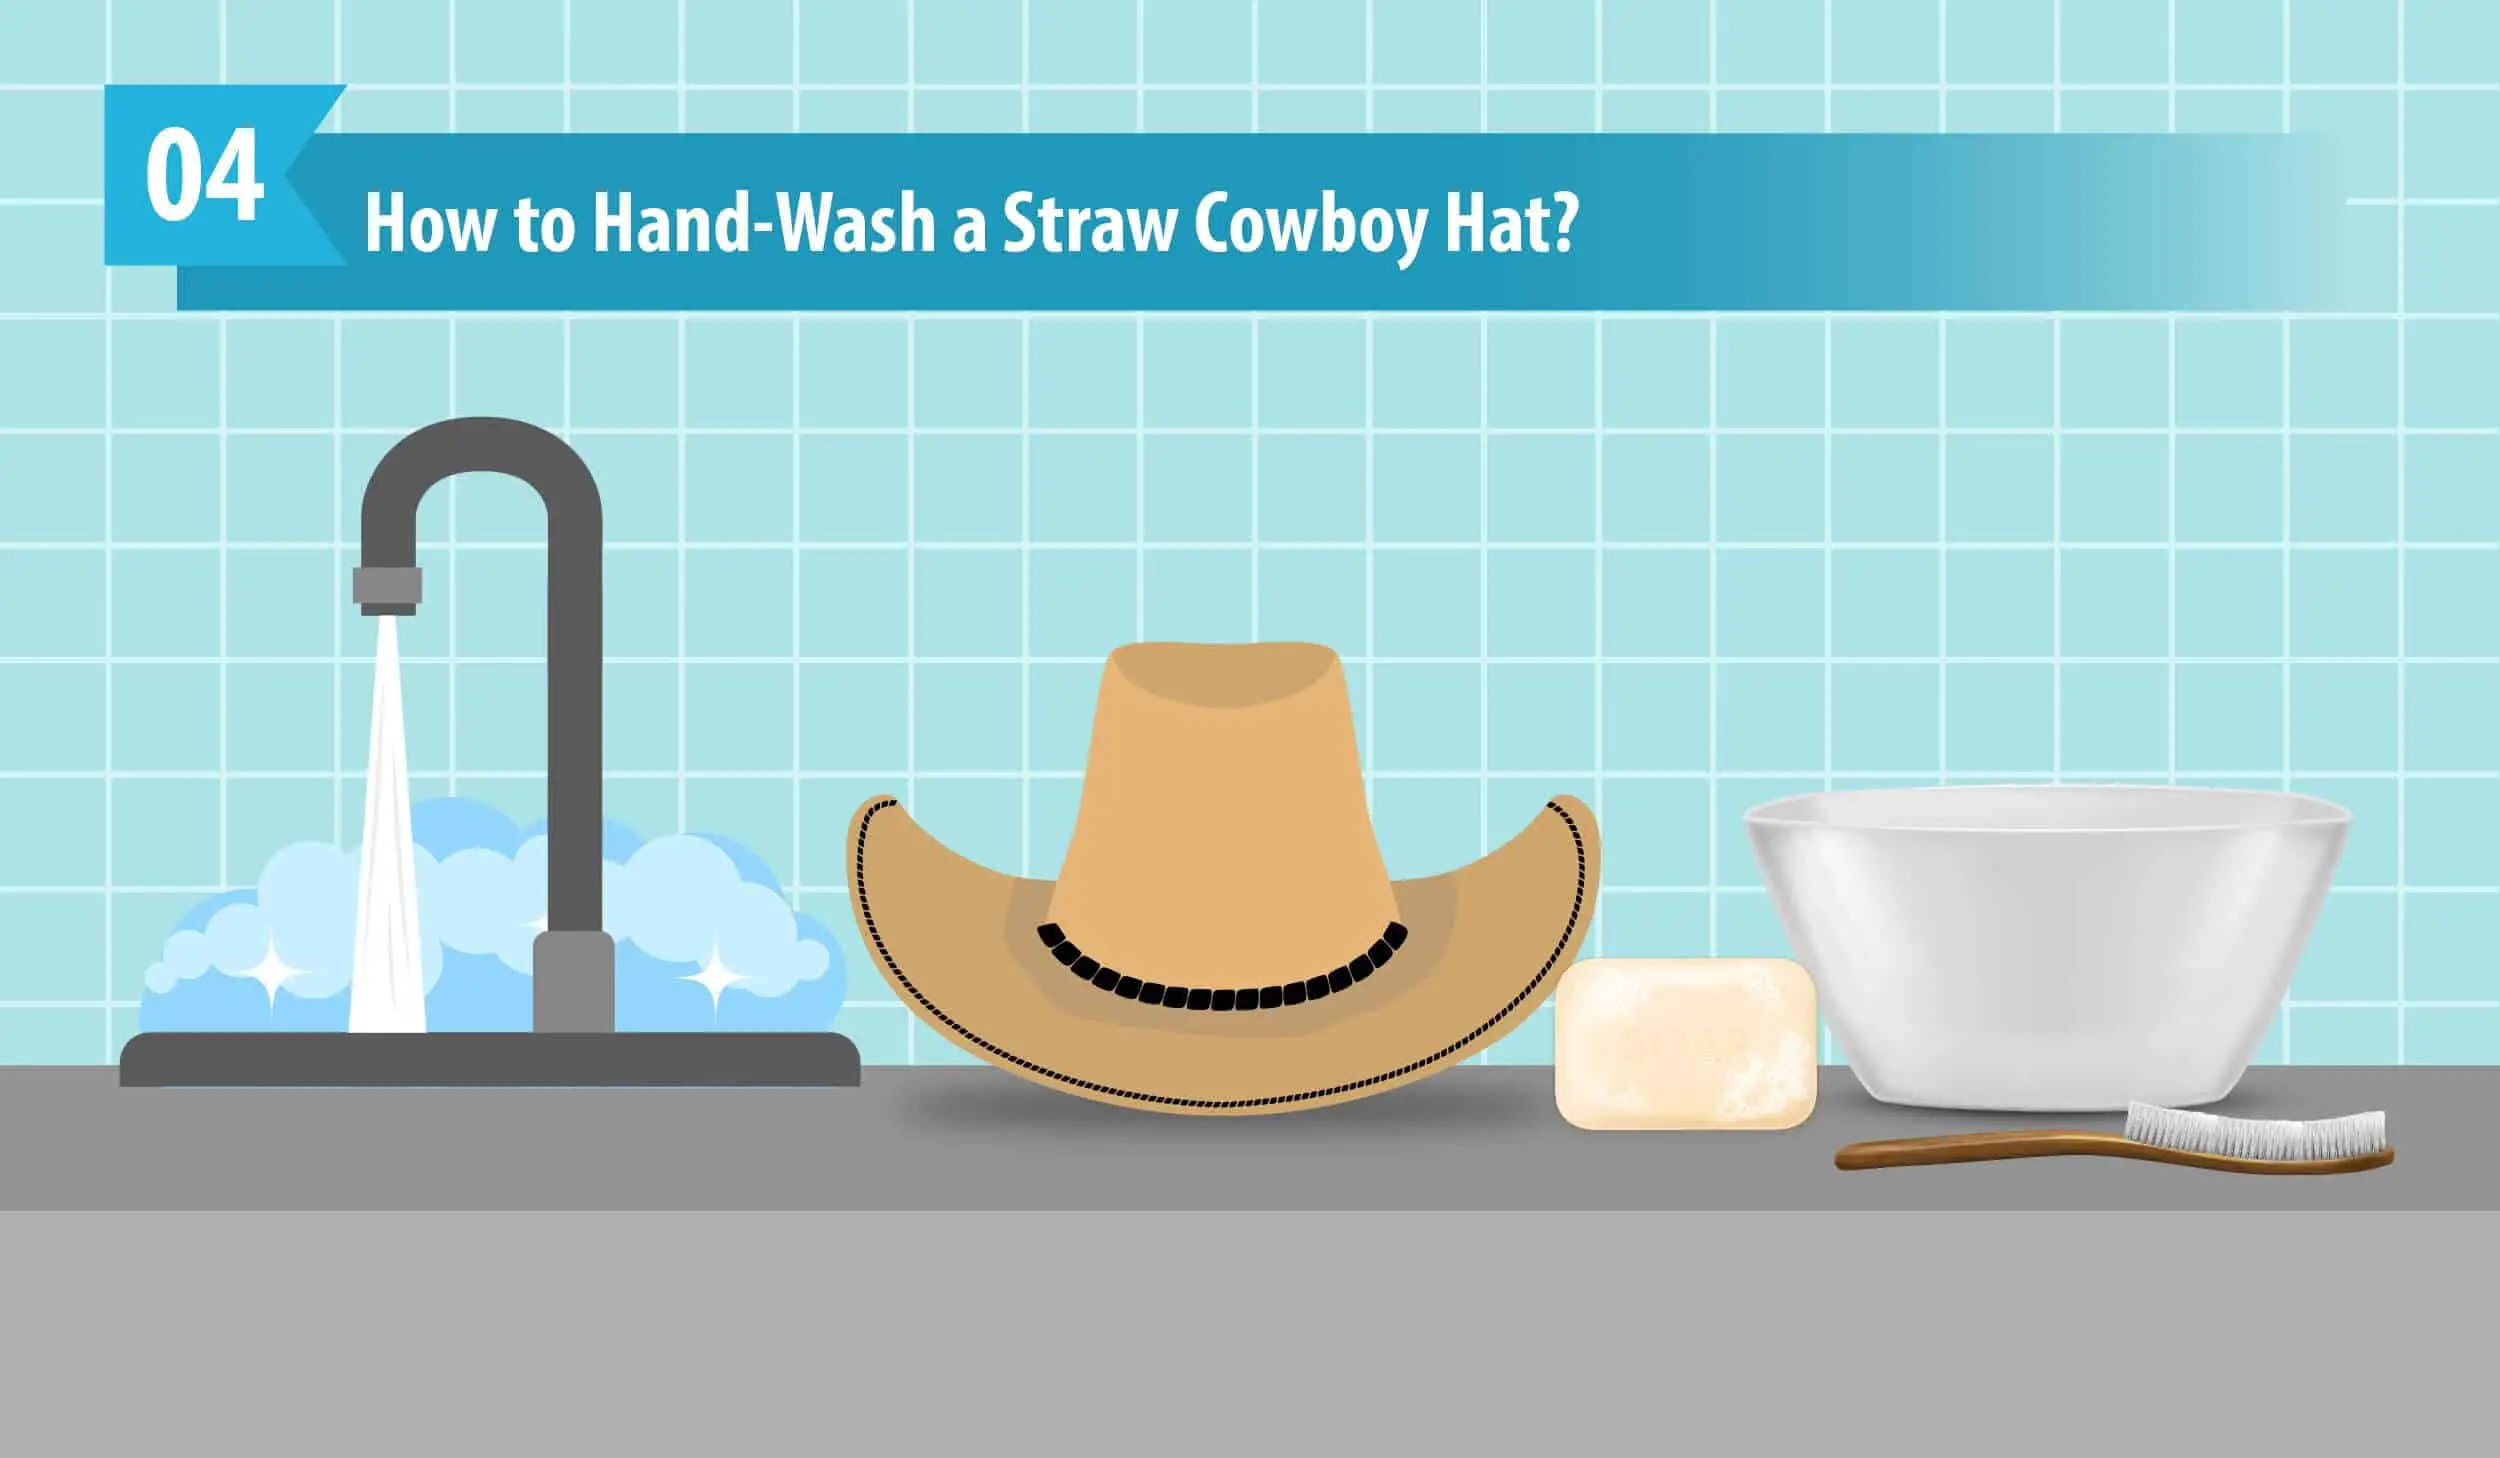 How to Hand-Wash a Straw Cowboy Hat